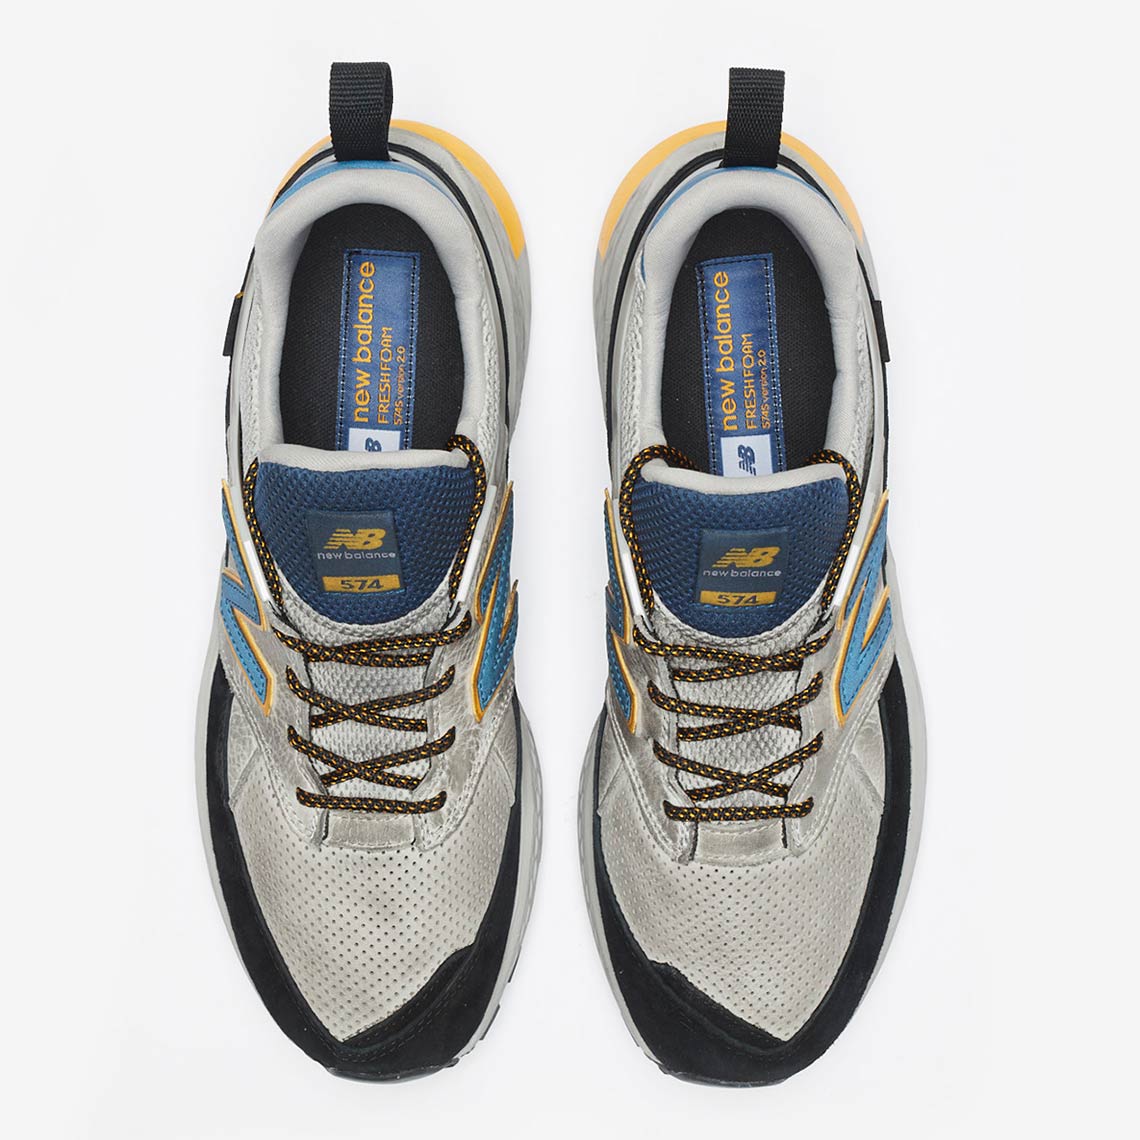 New Balance MS574 Buying Guide Store Links | SneakerNews.com